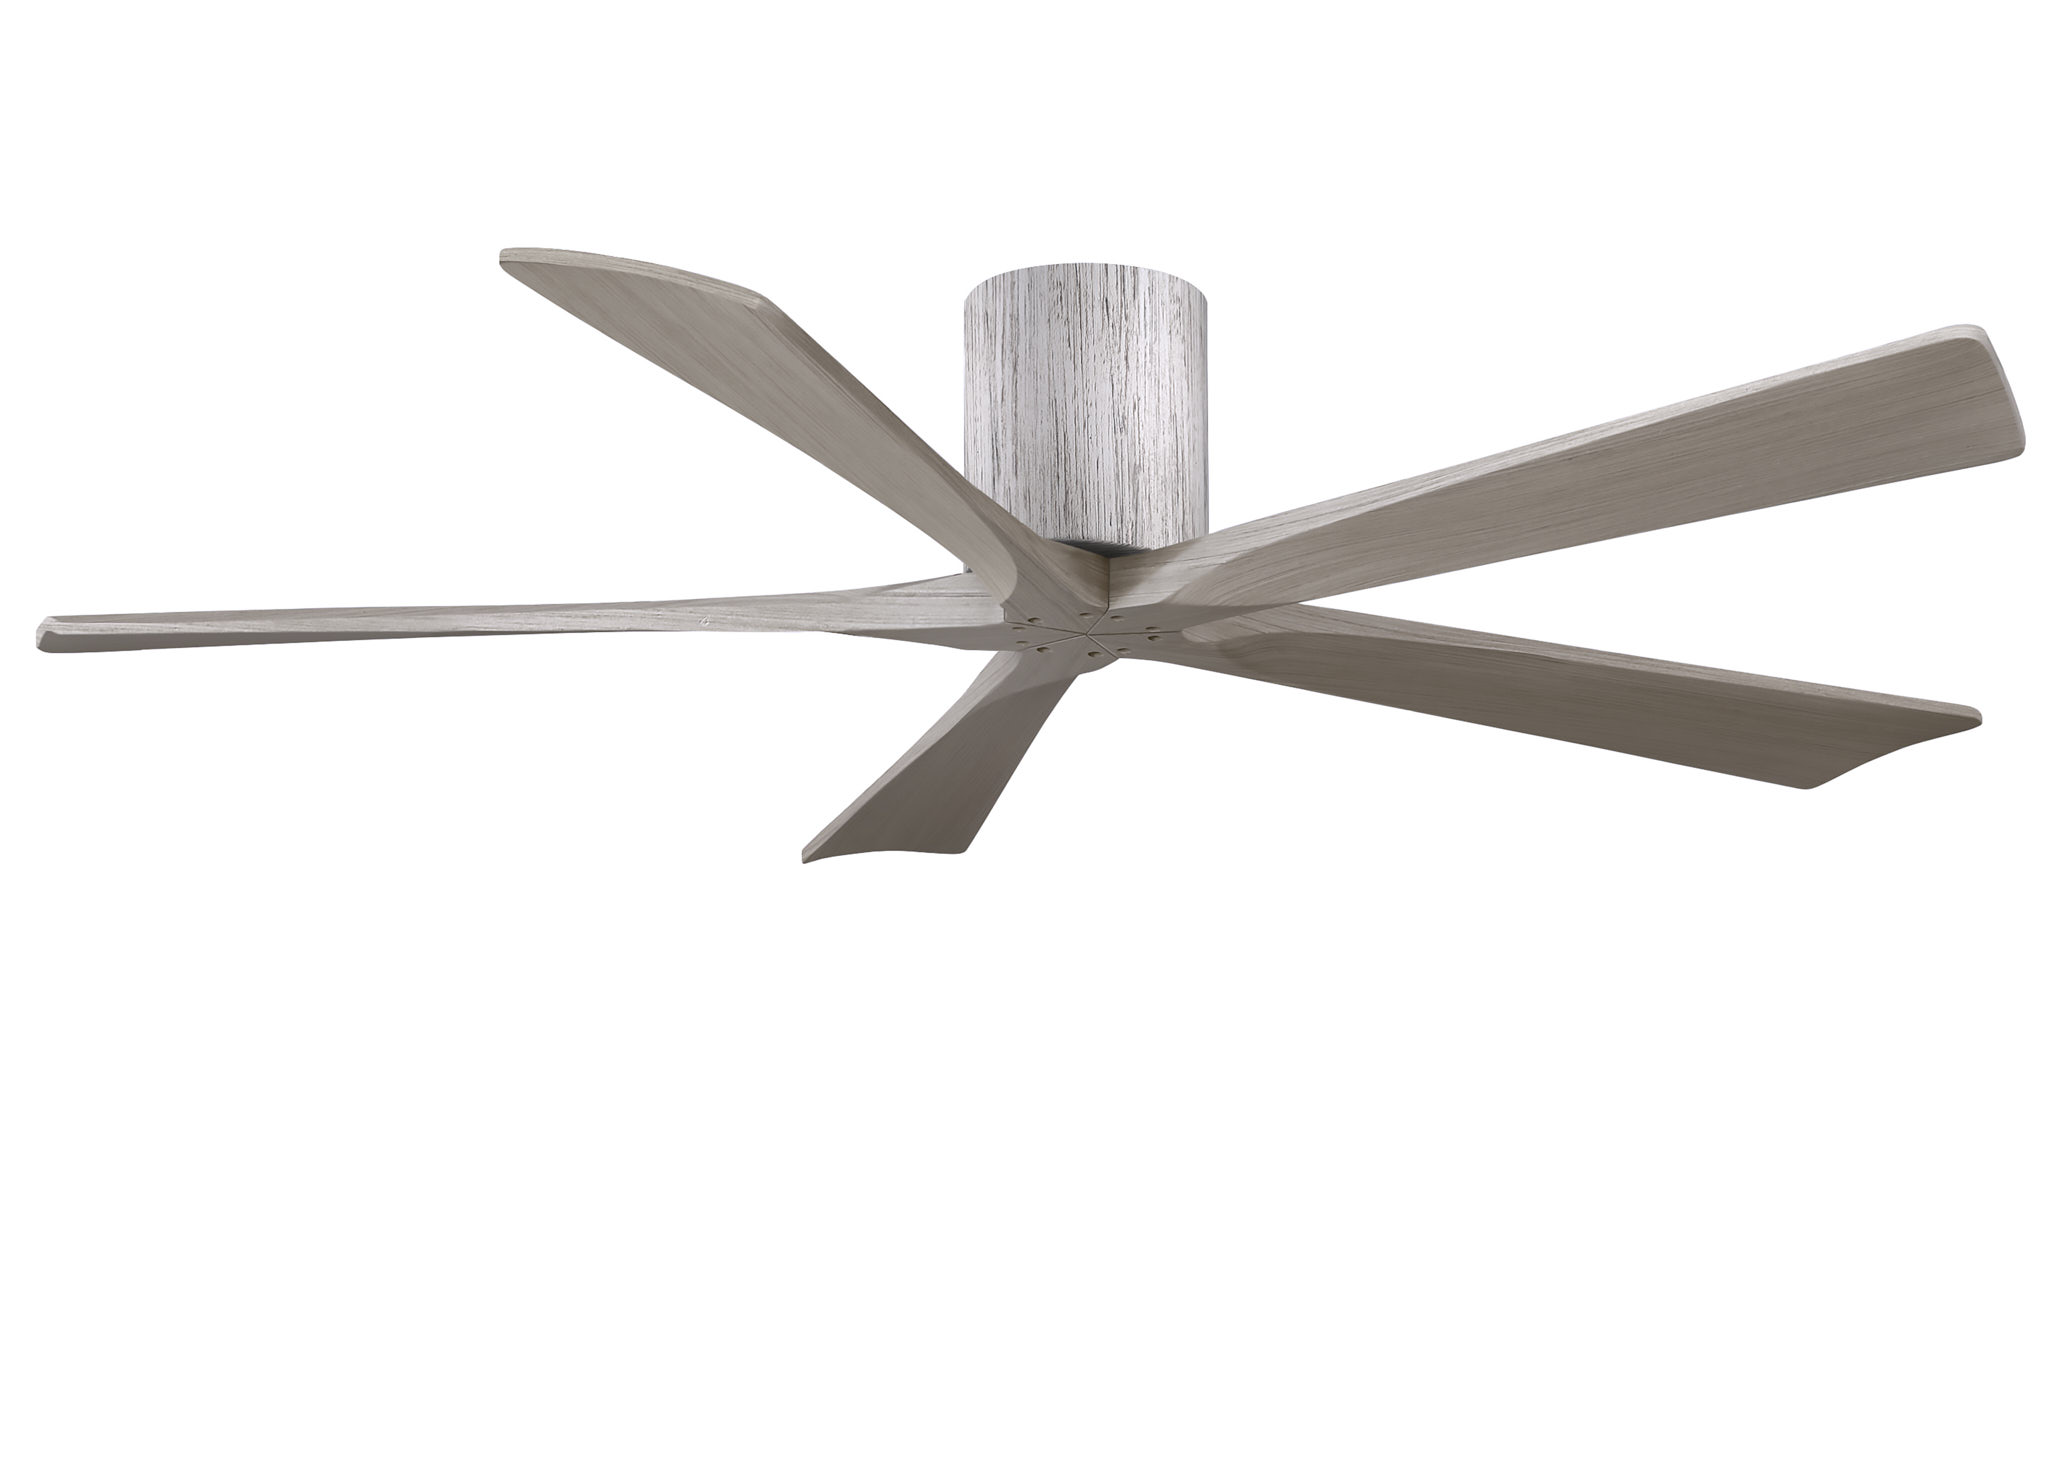 Irene-5H 6-speed ceiling fan in barn wood finish with 60